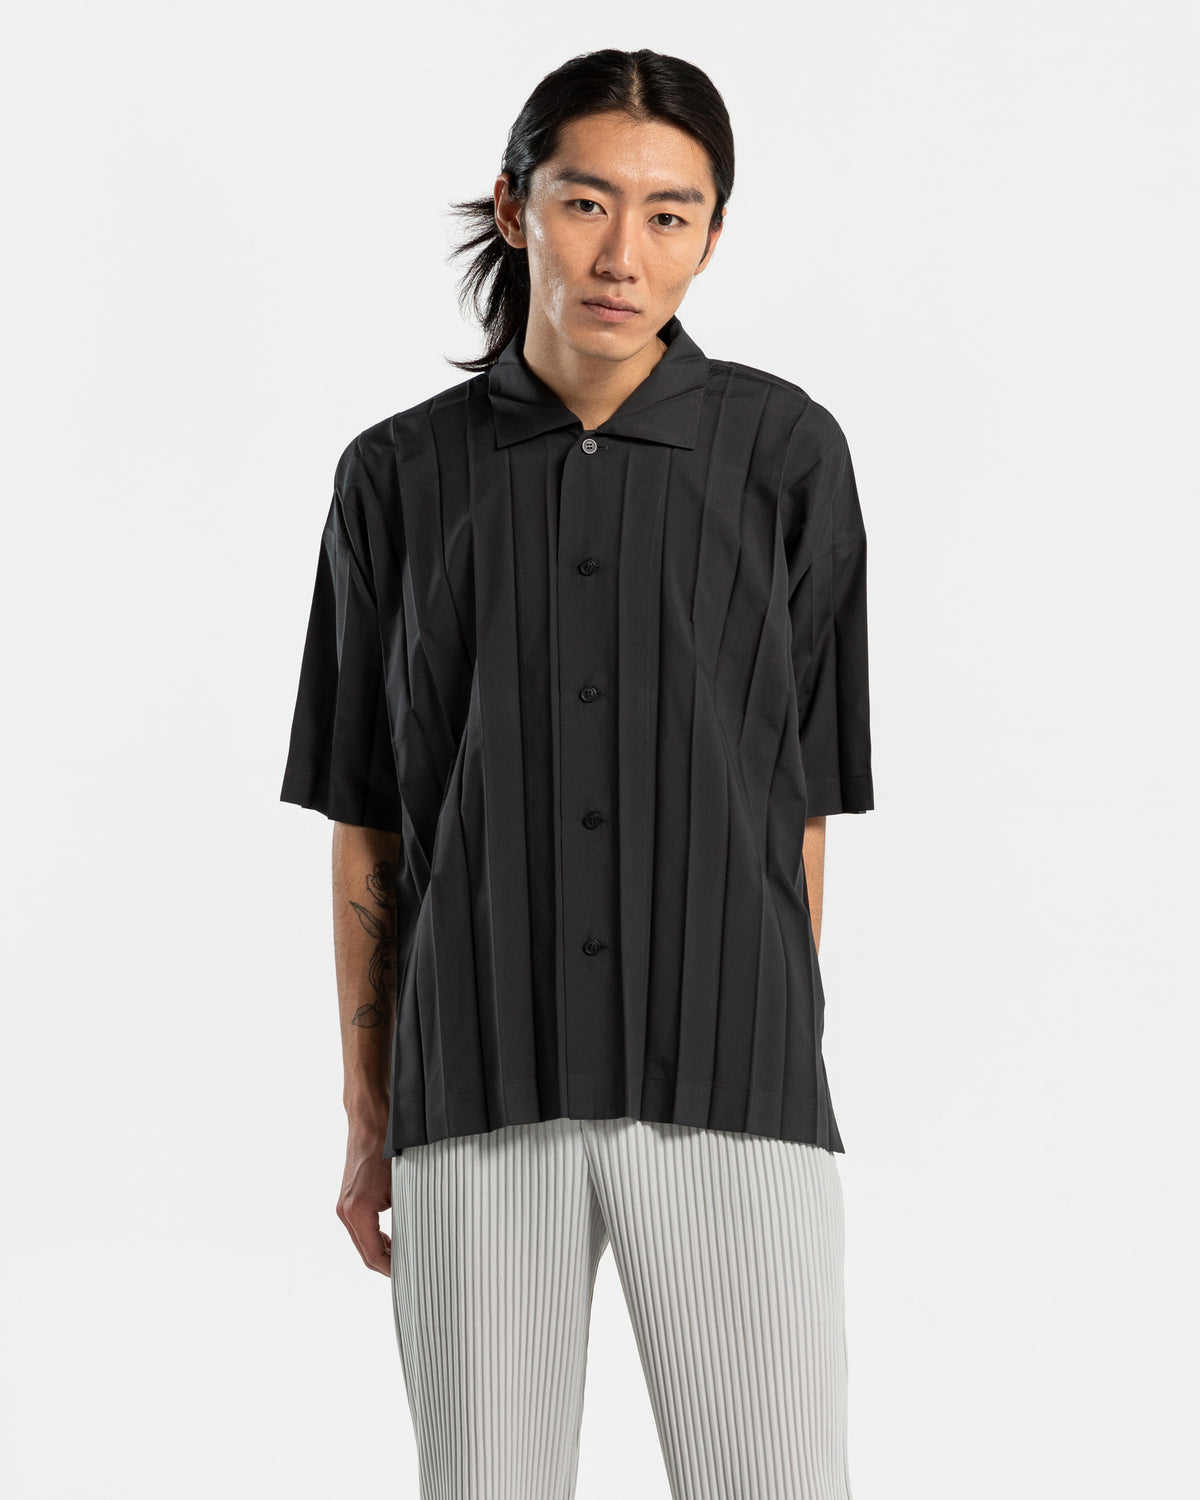 Online Shopping for Edge Shirt in Charcoal Grey Homme Plissé Issey